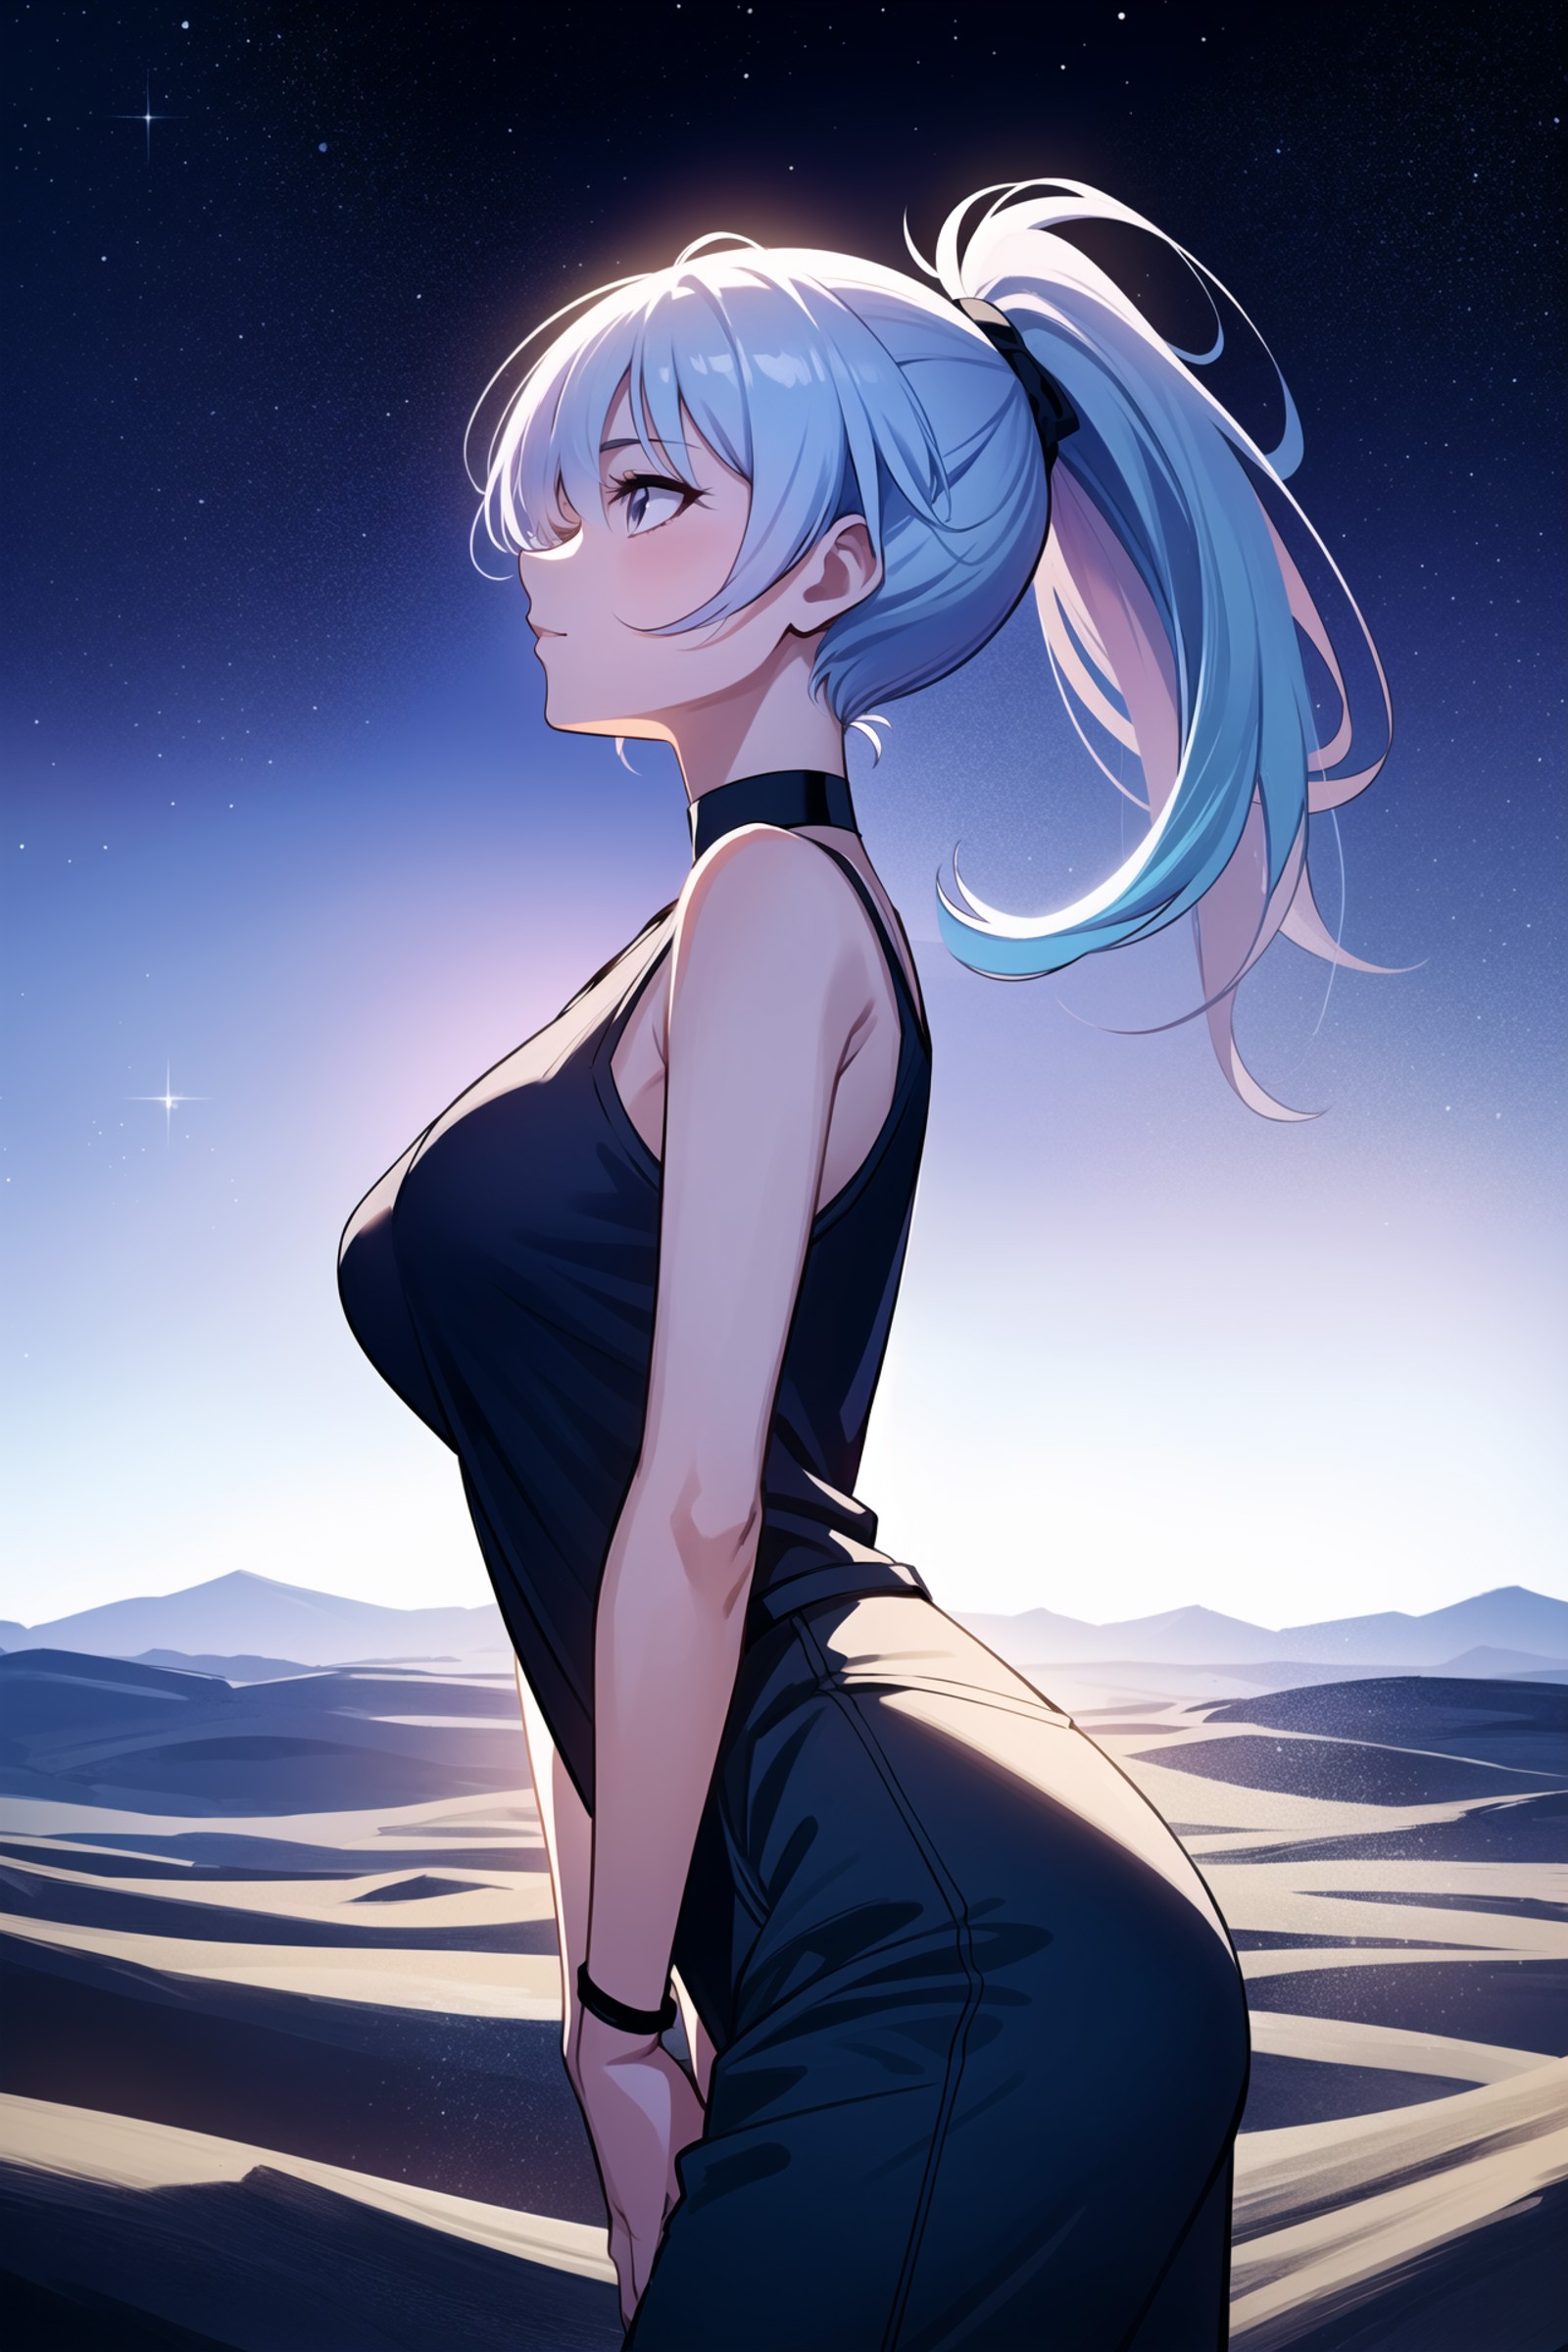 Wide drawing of a girl with pearly white hair, gazing forward, amidst a scene of a vast desert with oases that sparkle und...